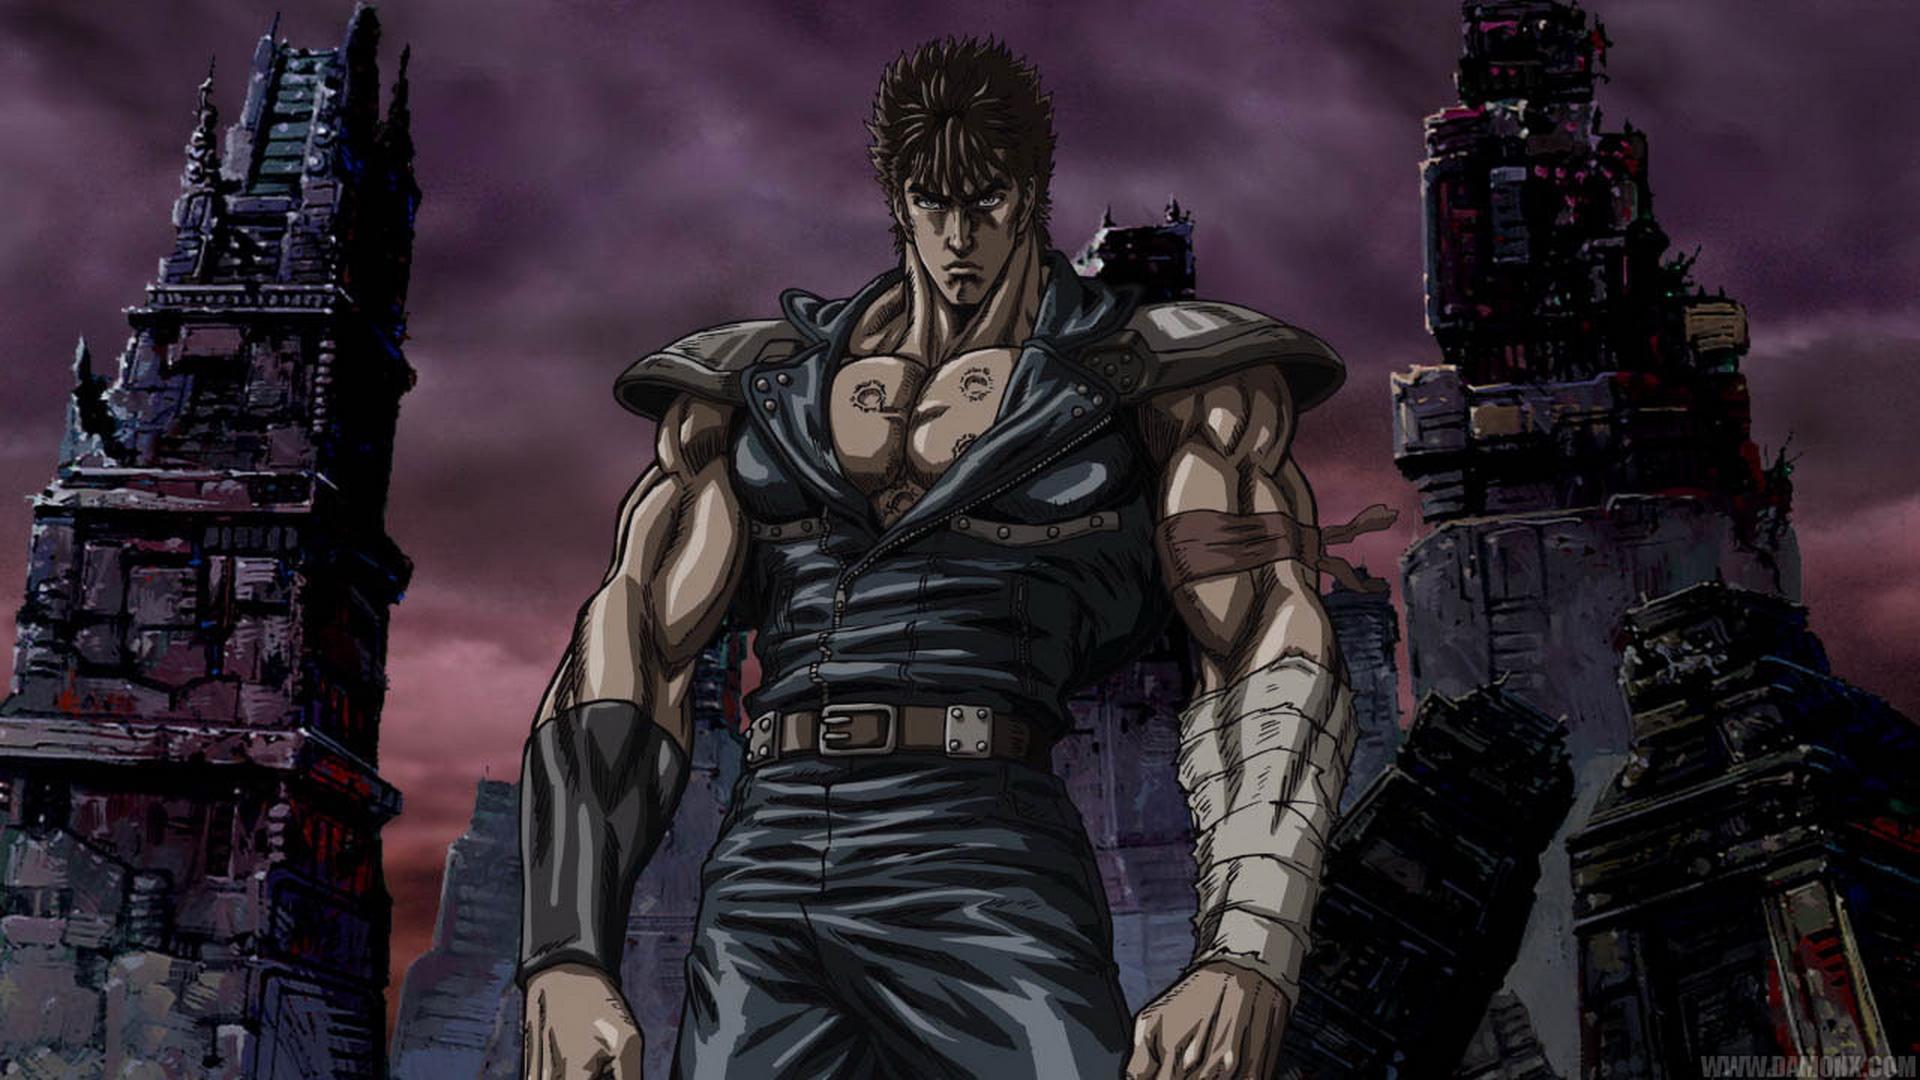 Fist of the North Star Wallpapers Facebook Cover.